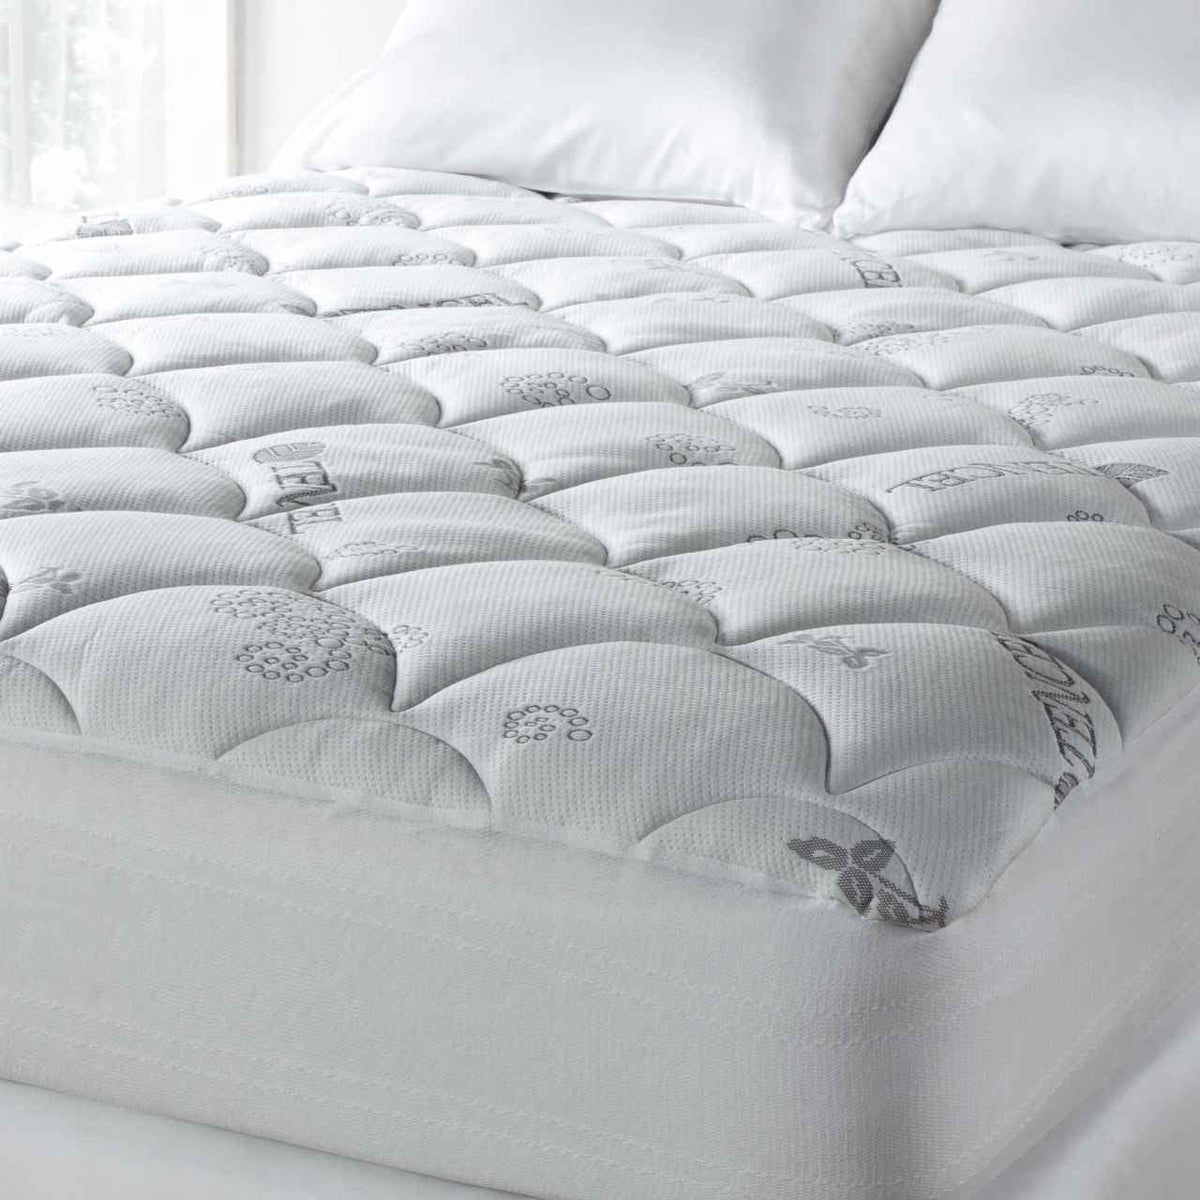 Extra Plush Rest-Fill Down Alternative TENCEL Cooling Mattress Pad by Spa Luxe (Hypoallergenic) - beddingbag.com